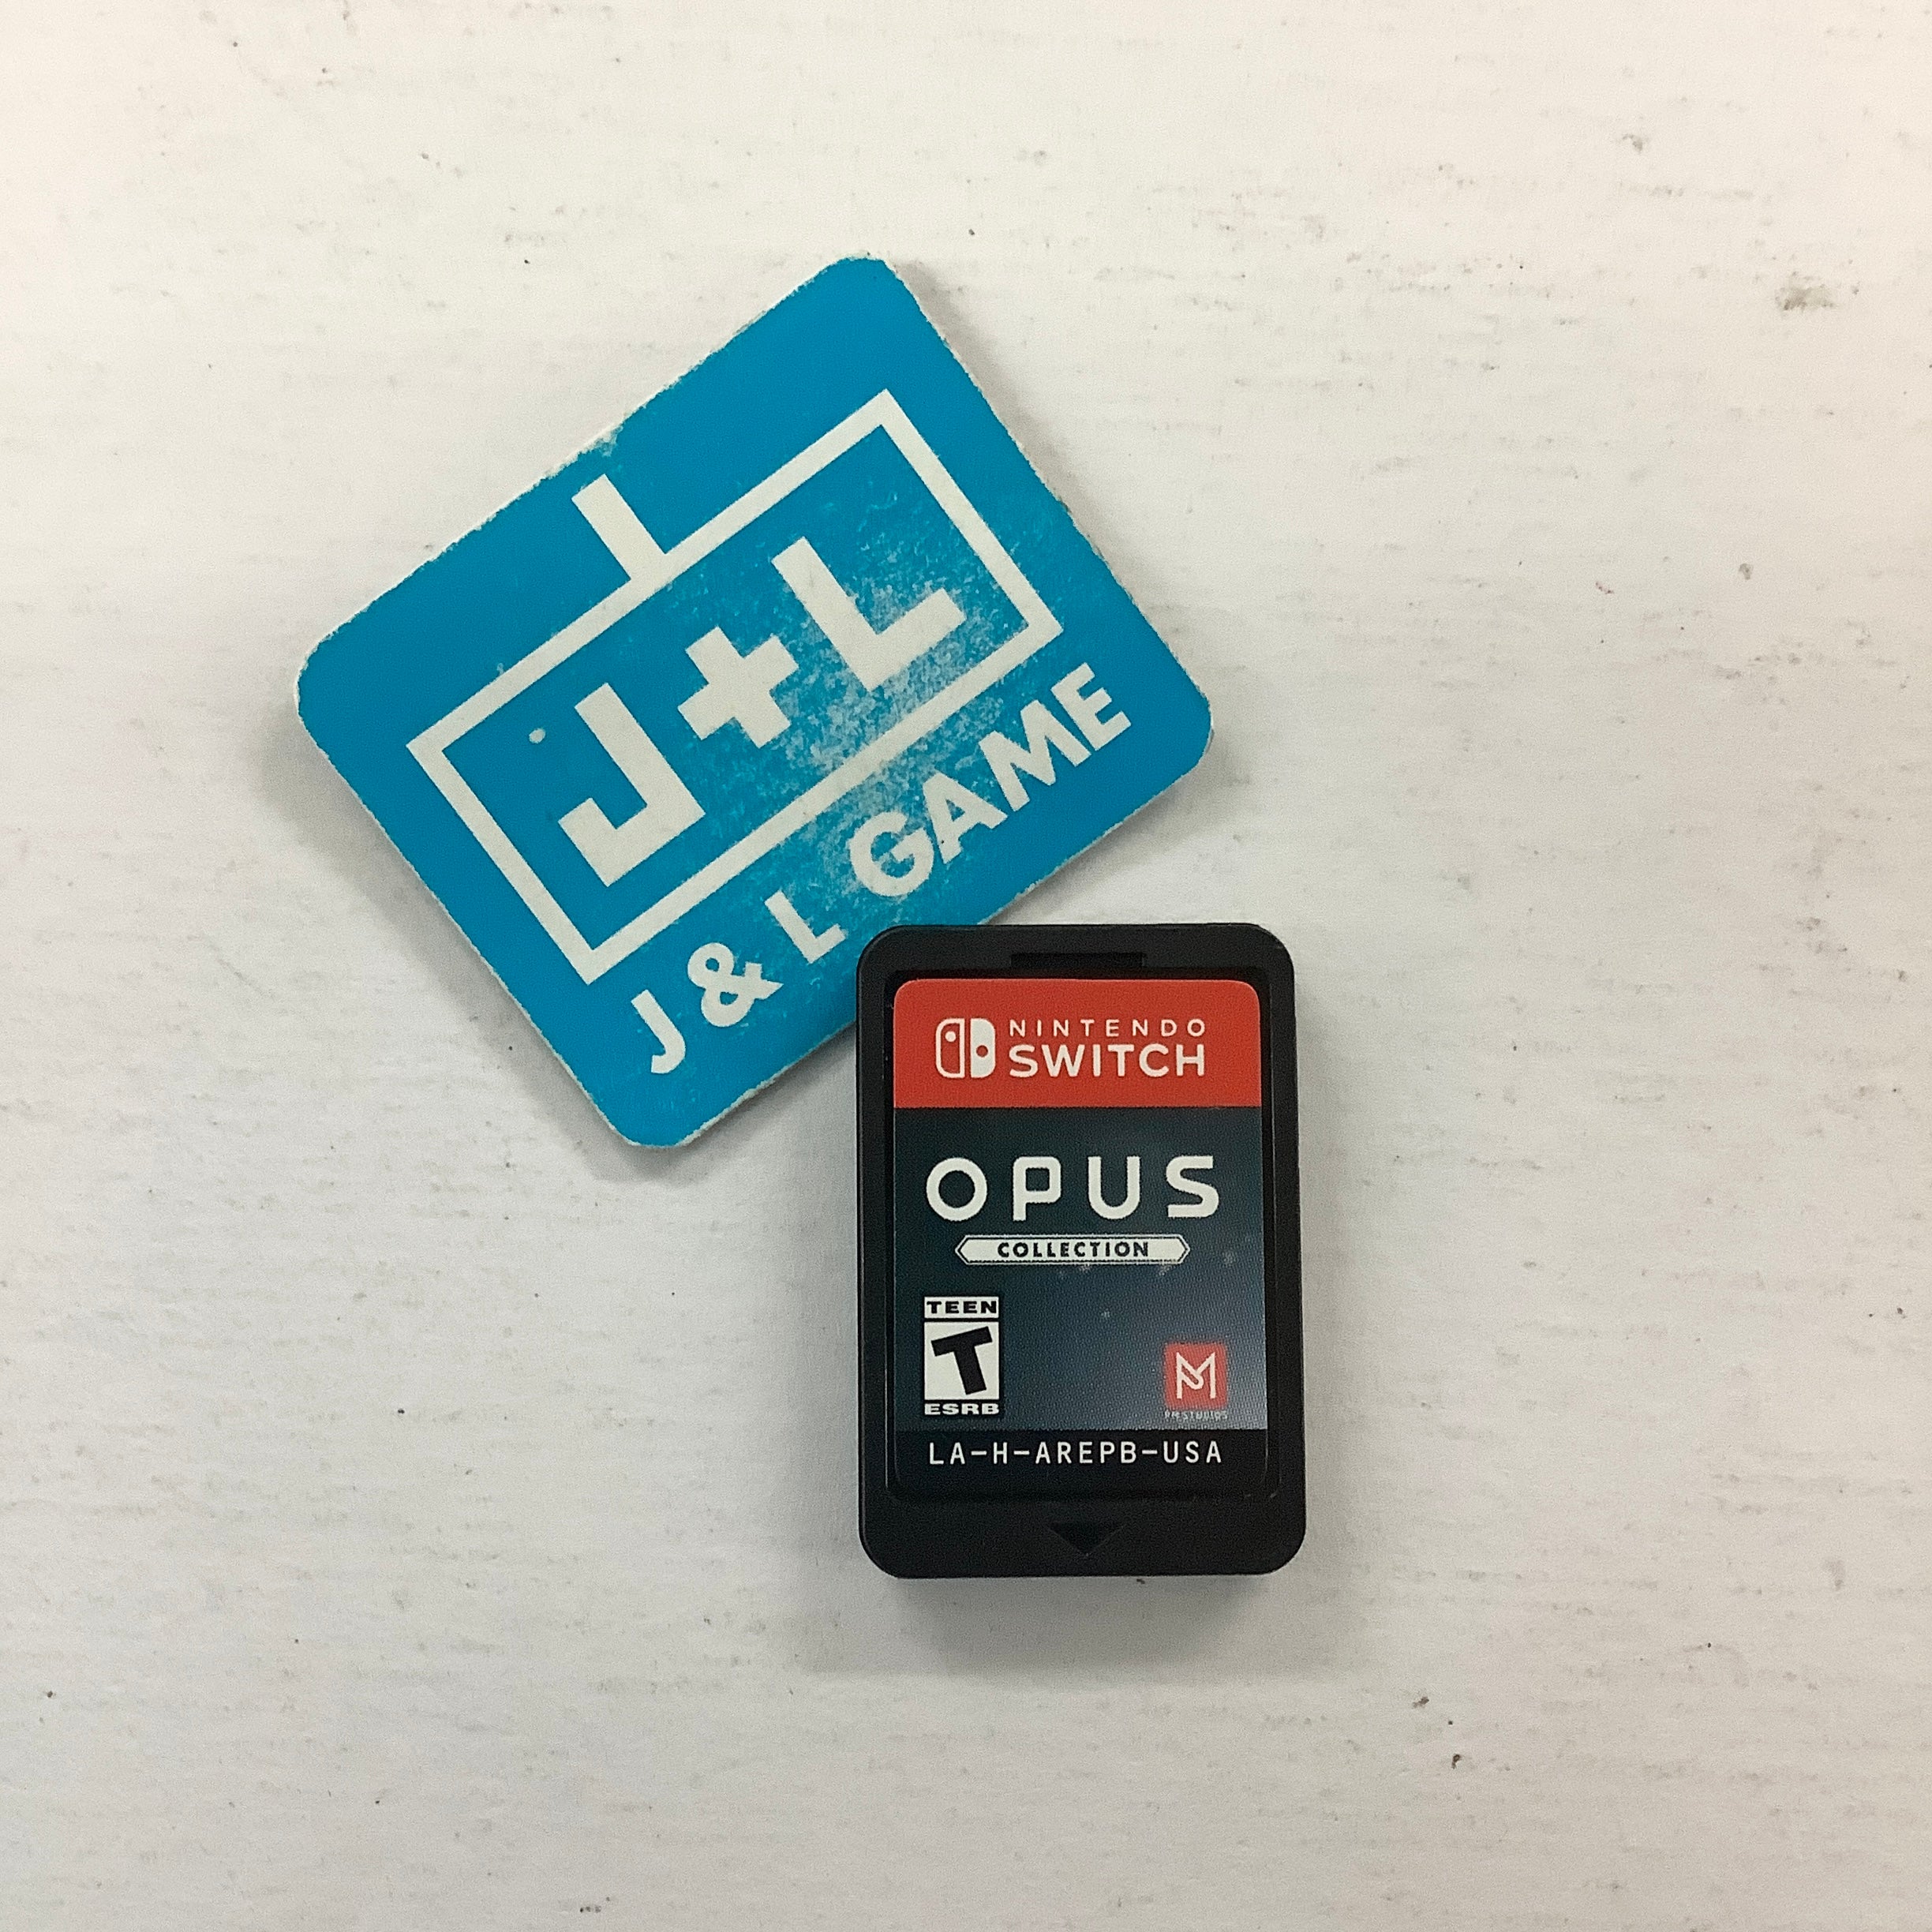 OPUS Collection - (NSW) Nintendo Switch [Pre-Owned] Video Games PM Studios   